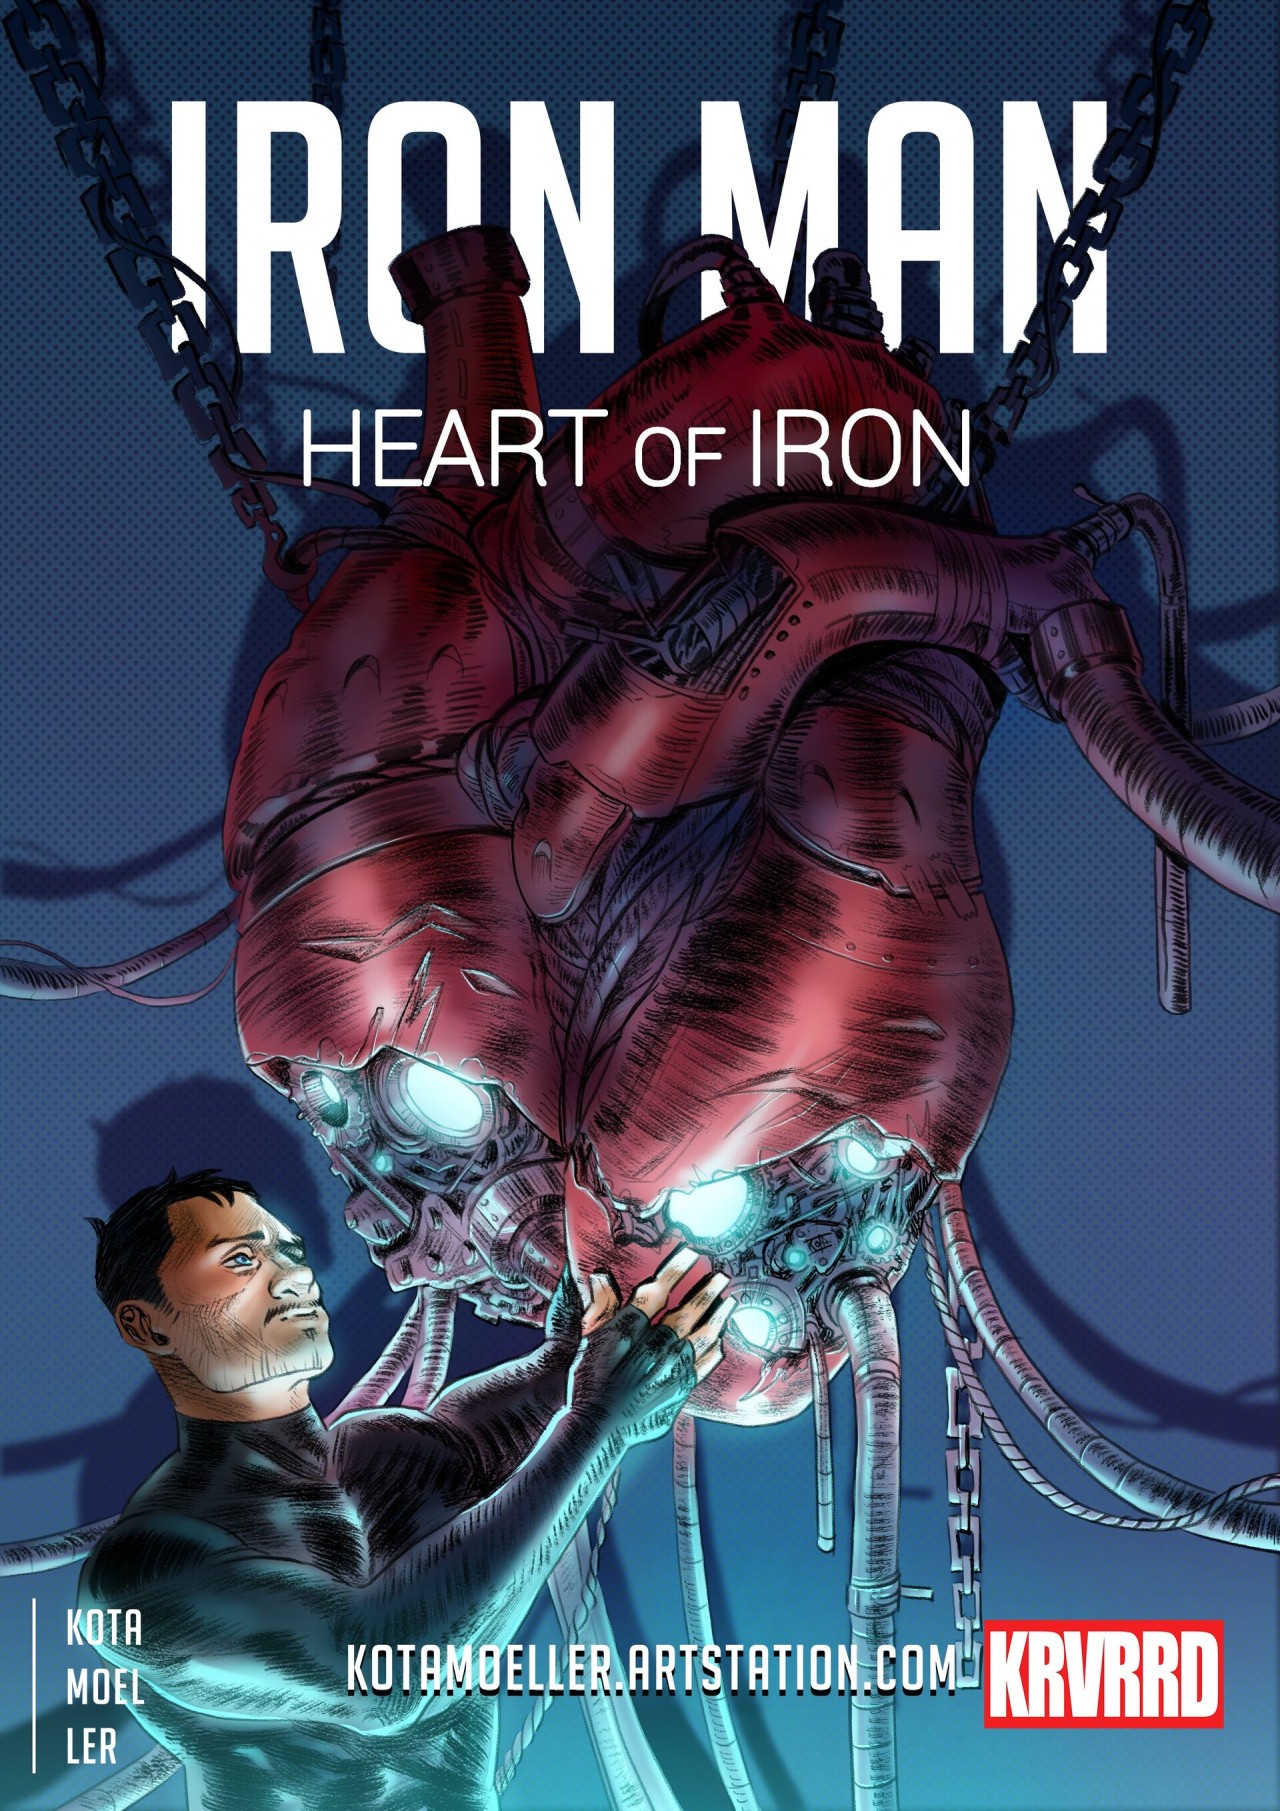 “Heart of Iron”Iron Man unofficial comic book cover illustration =) #I hope the url works and the picture shows up #ironman#iron man#tonystark#tony stark#comic#cover#illustration#comic cover#book cover#cover illustration#marvel#art